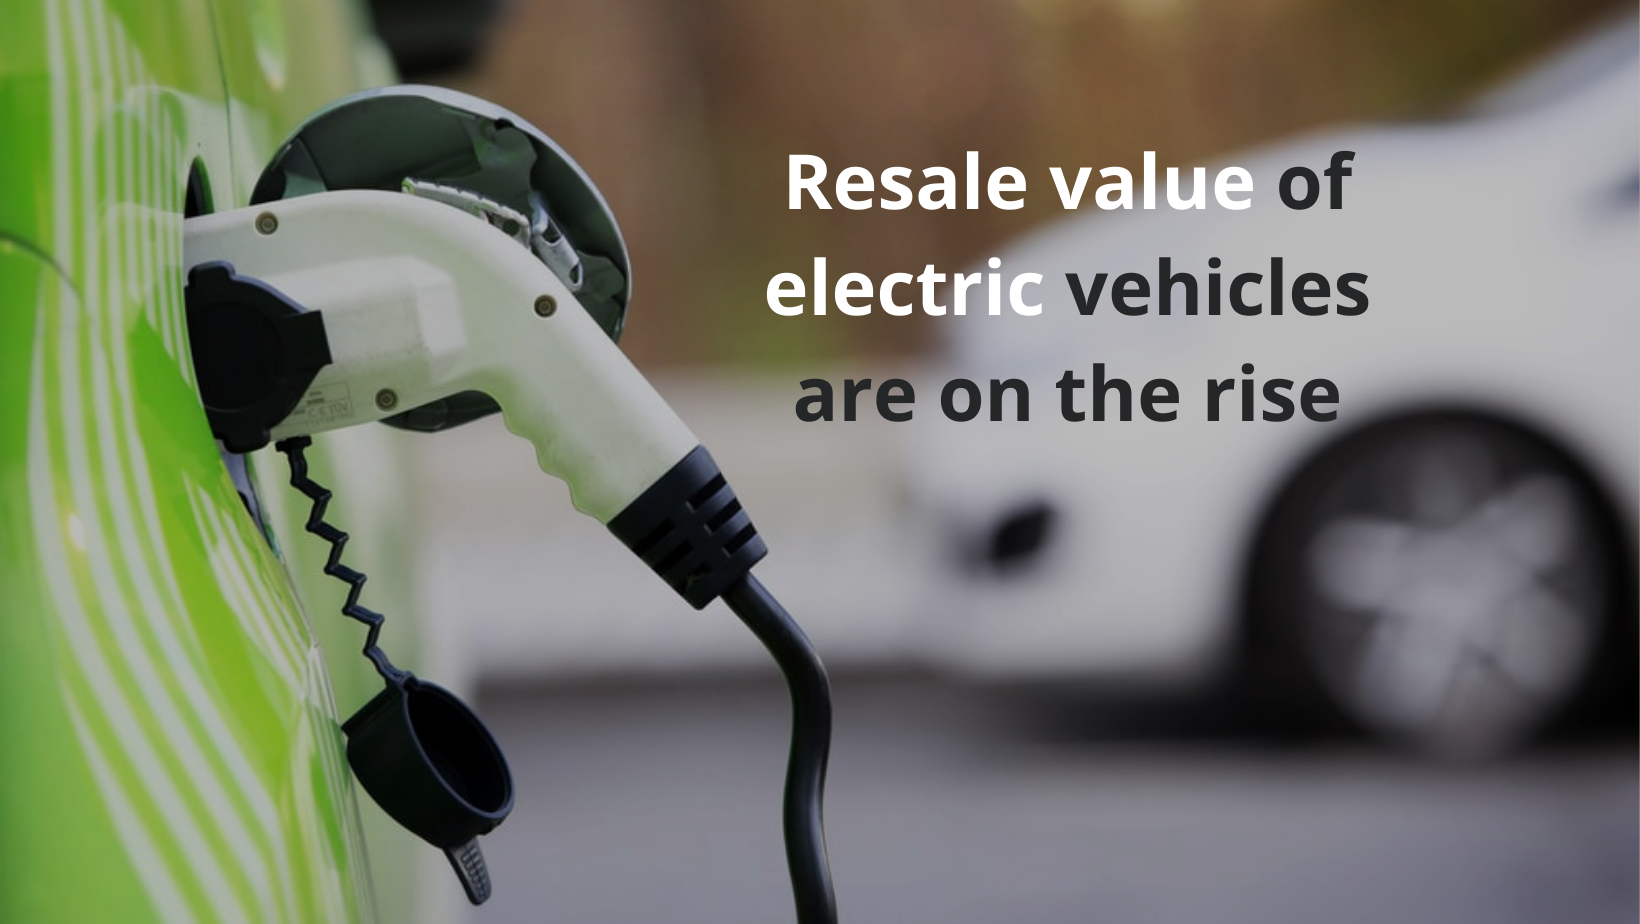 Resale value of electric vehicles are on the rise